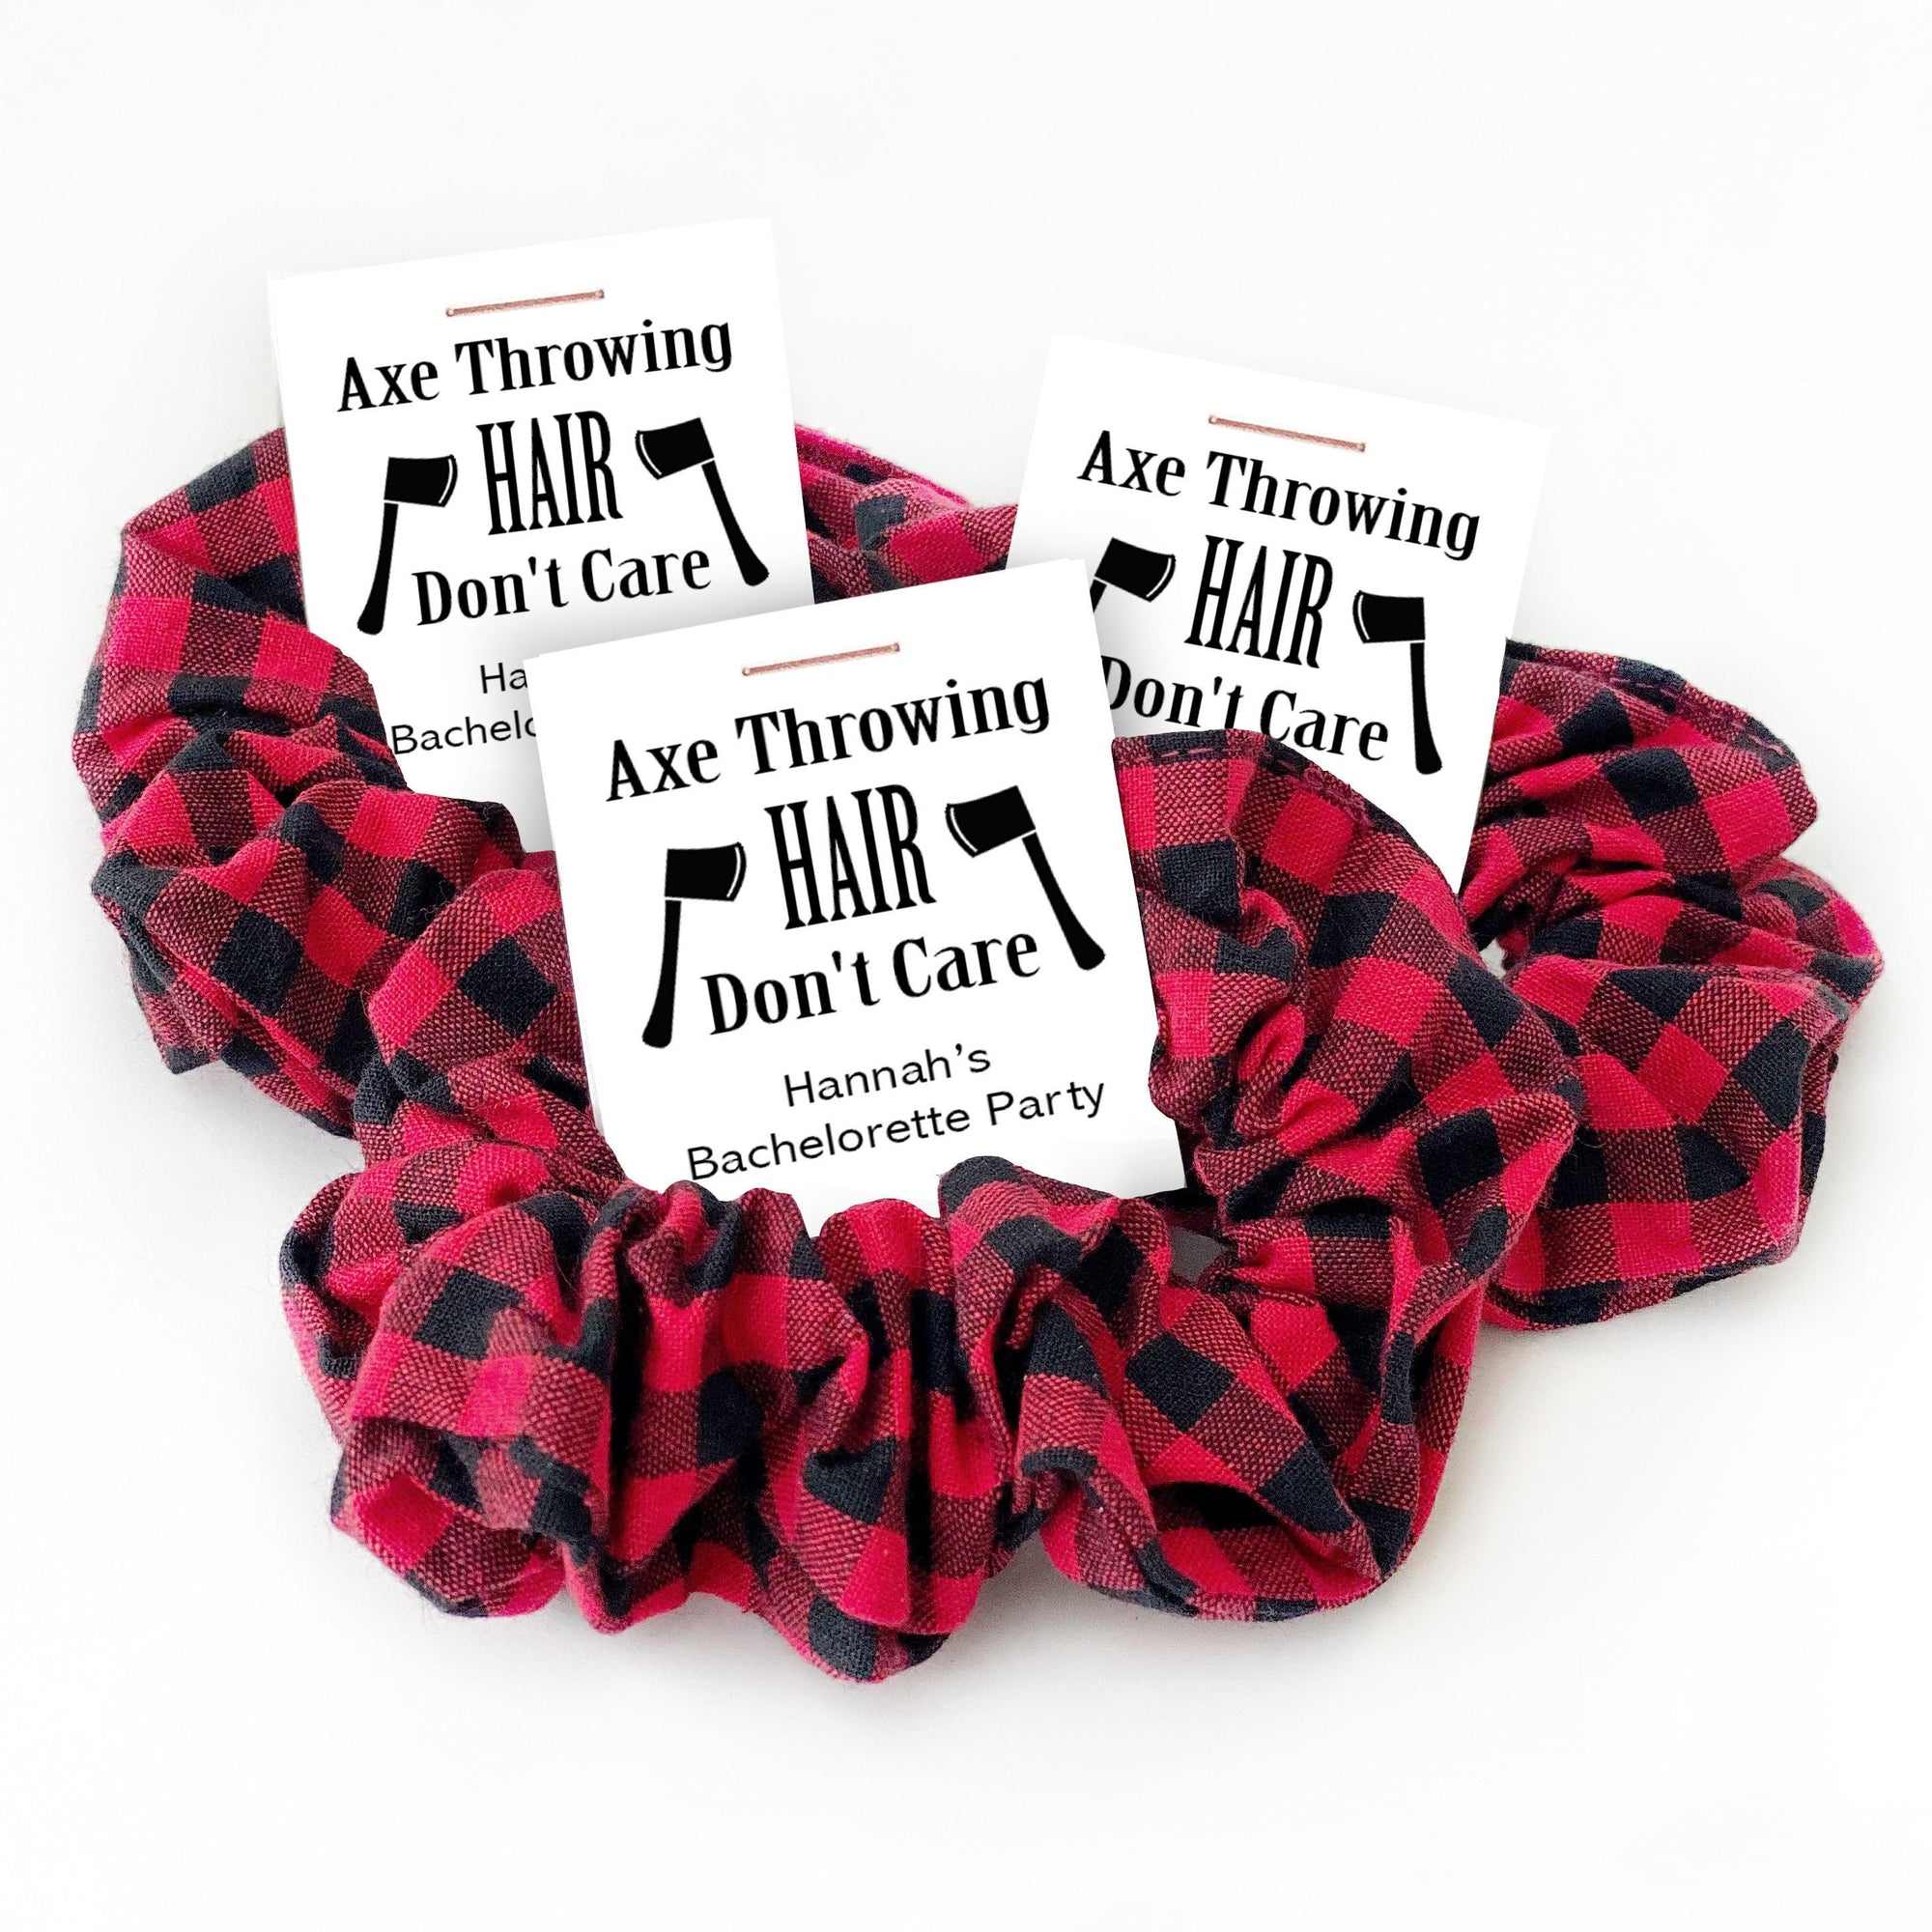 Axe Throwing Bachelorette Party Favors, Buffalo Plaid Hair Scrunchie, Axe Throwing Gift for Guests, Axe Throwing Party Favors